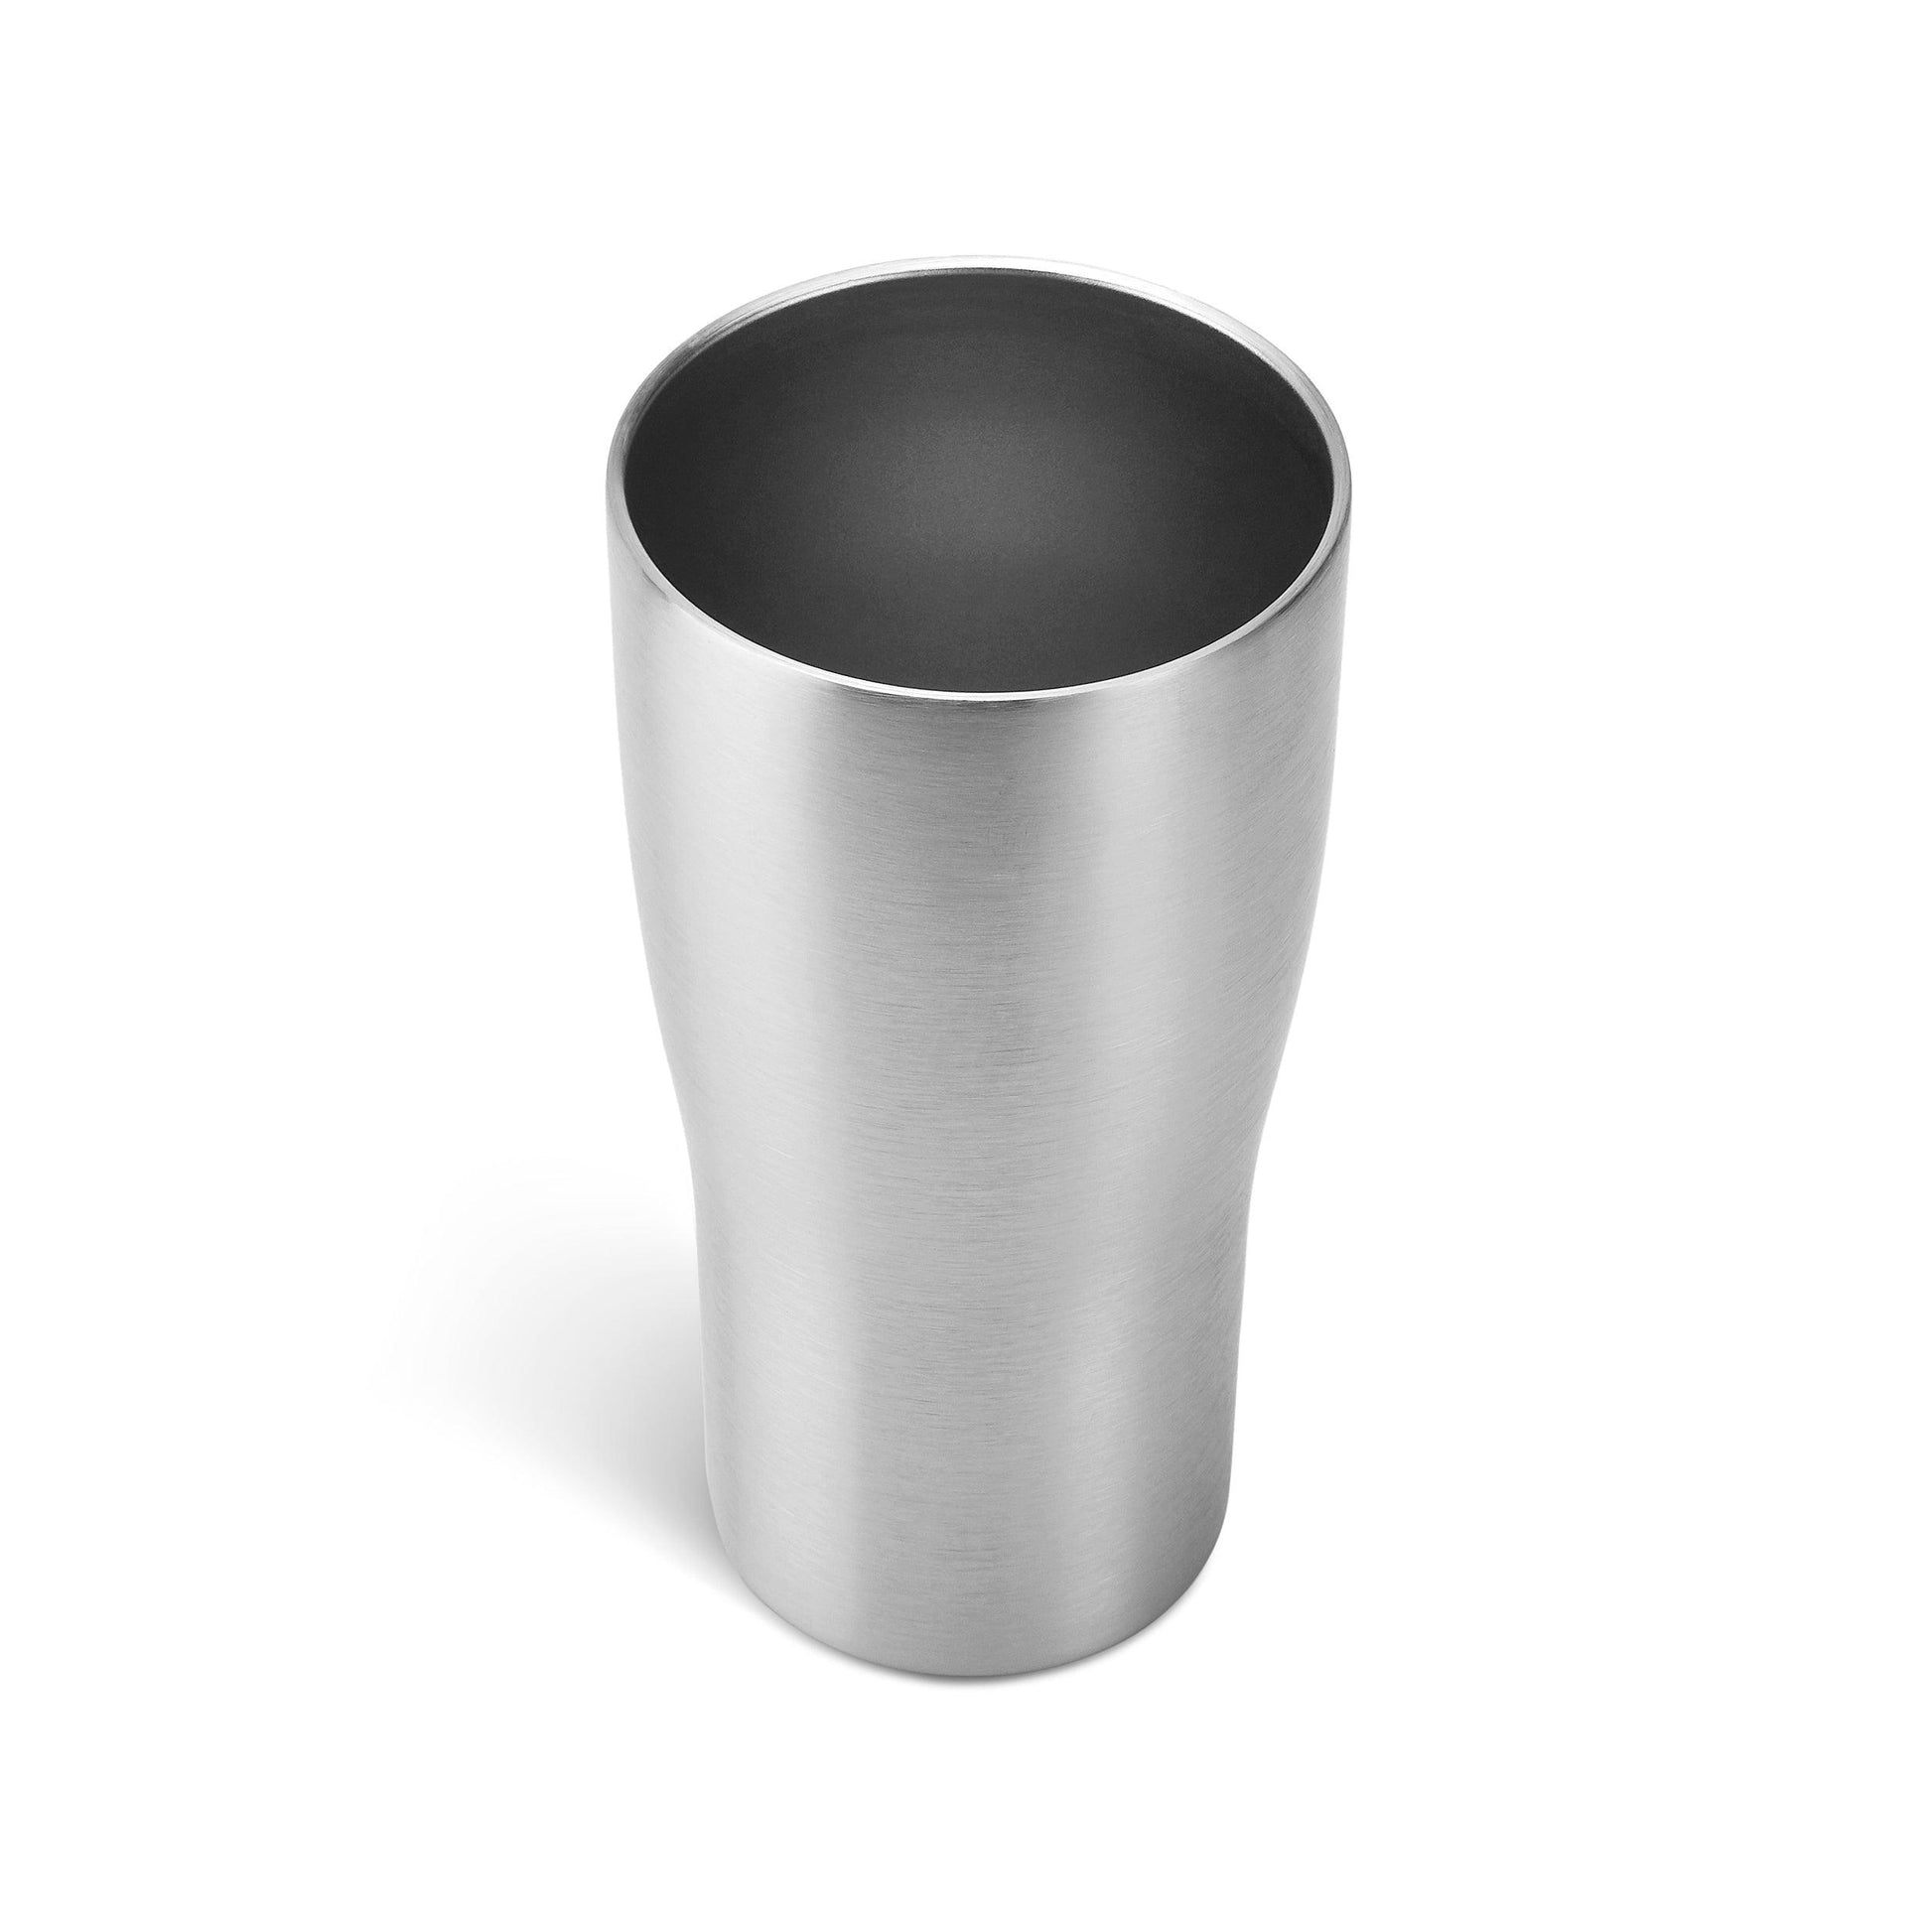 Ello Rise 12oz Vacuum Insulated Stainless Steel Tumbler with Optional Straw